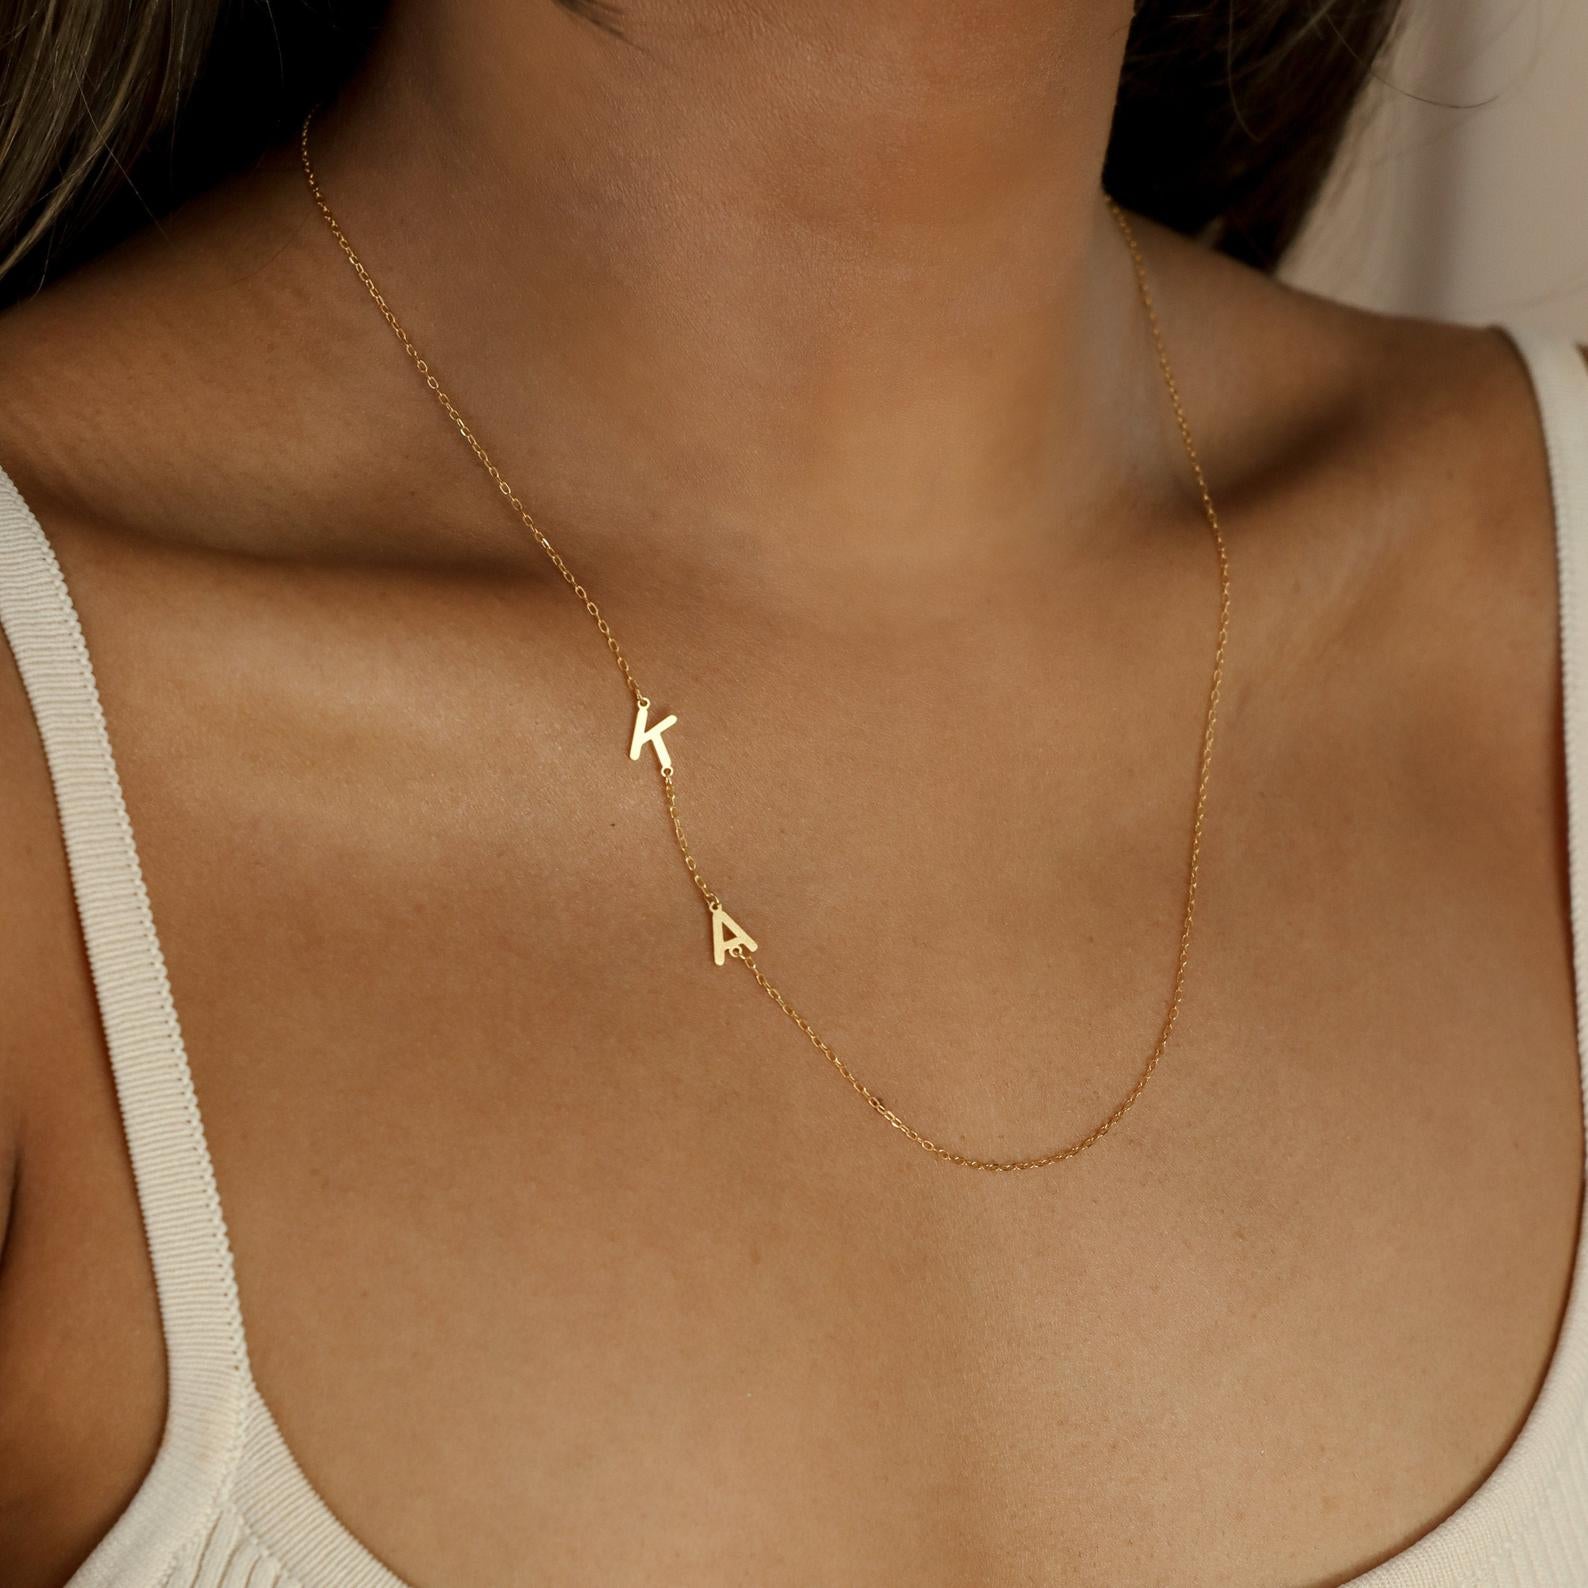 Buy Sideways Initial Necklace Sideways Letter Necklace Gold Letter Necklace  Personalized Necklace Bridesmaid Gift Valentine's Day Gift Online in India  - Etsy